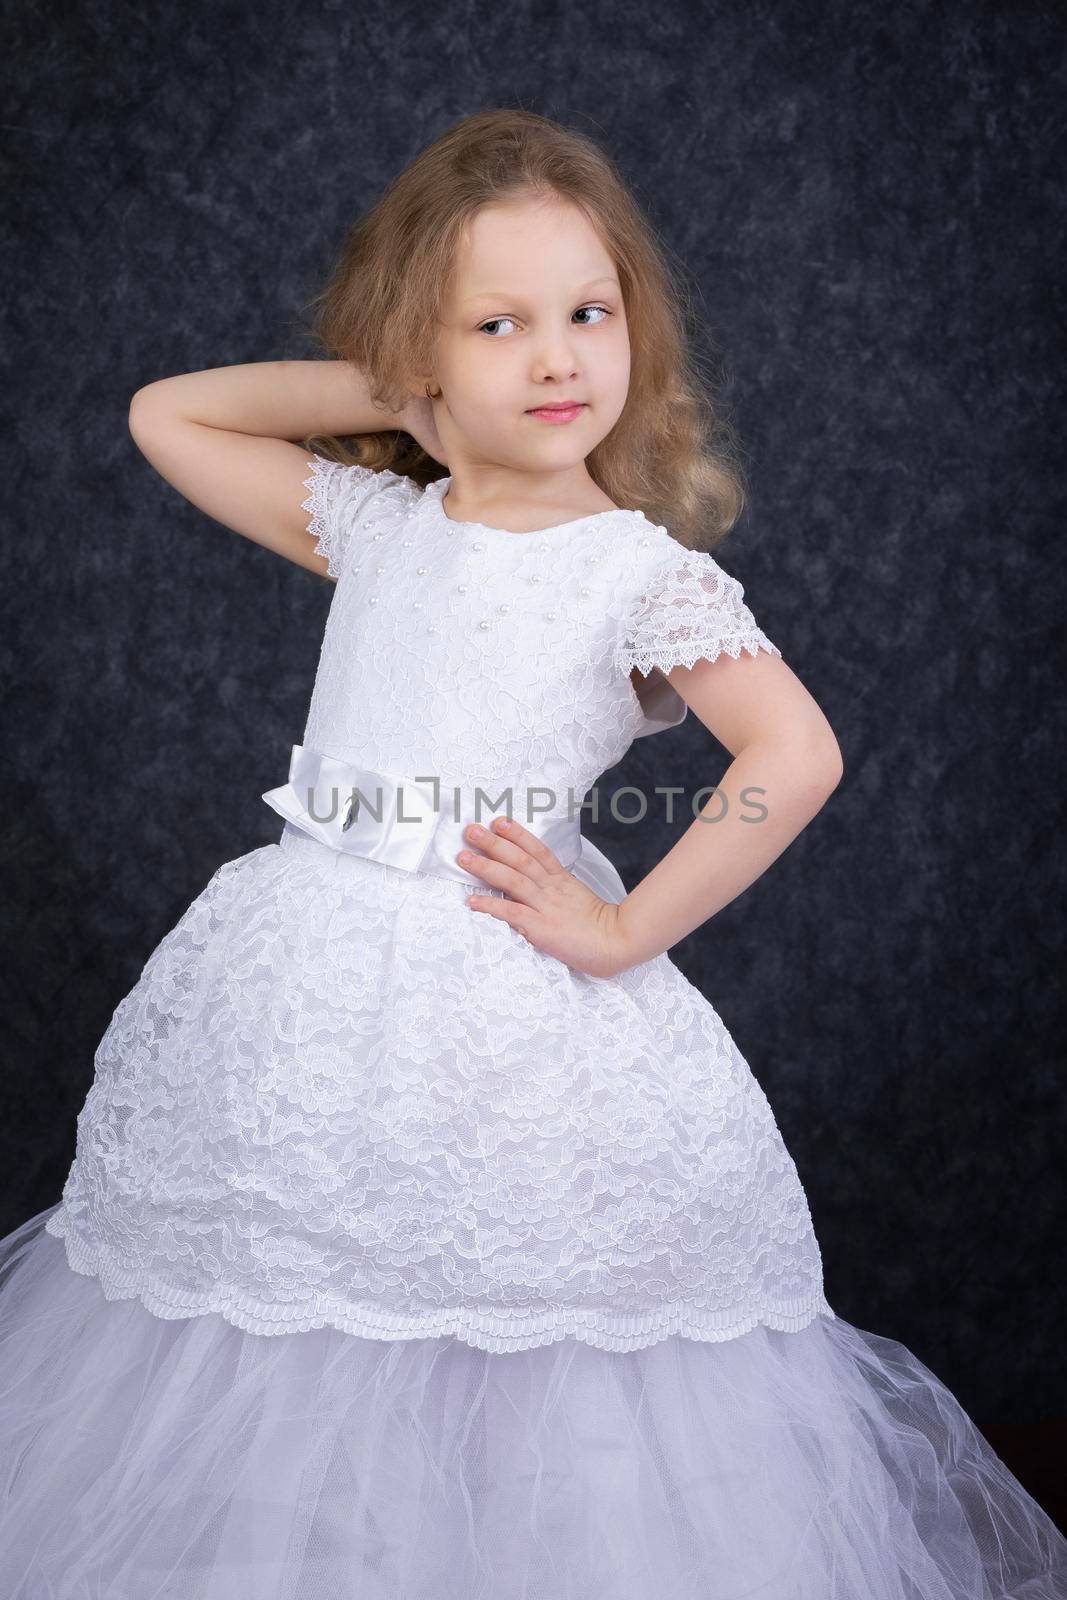 Cute little blonde girl in a beautiful white dress on a dark background. Six year old beautiful girl